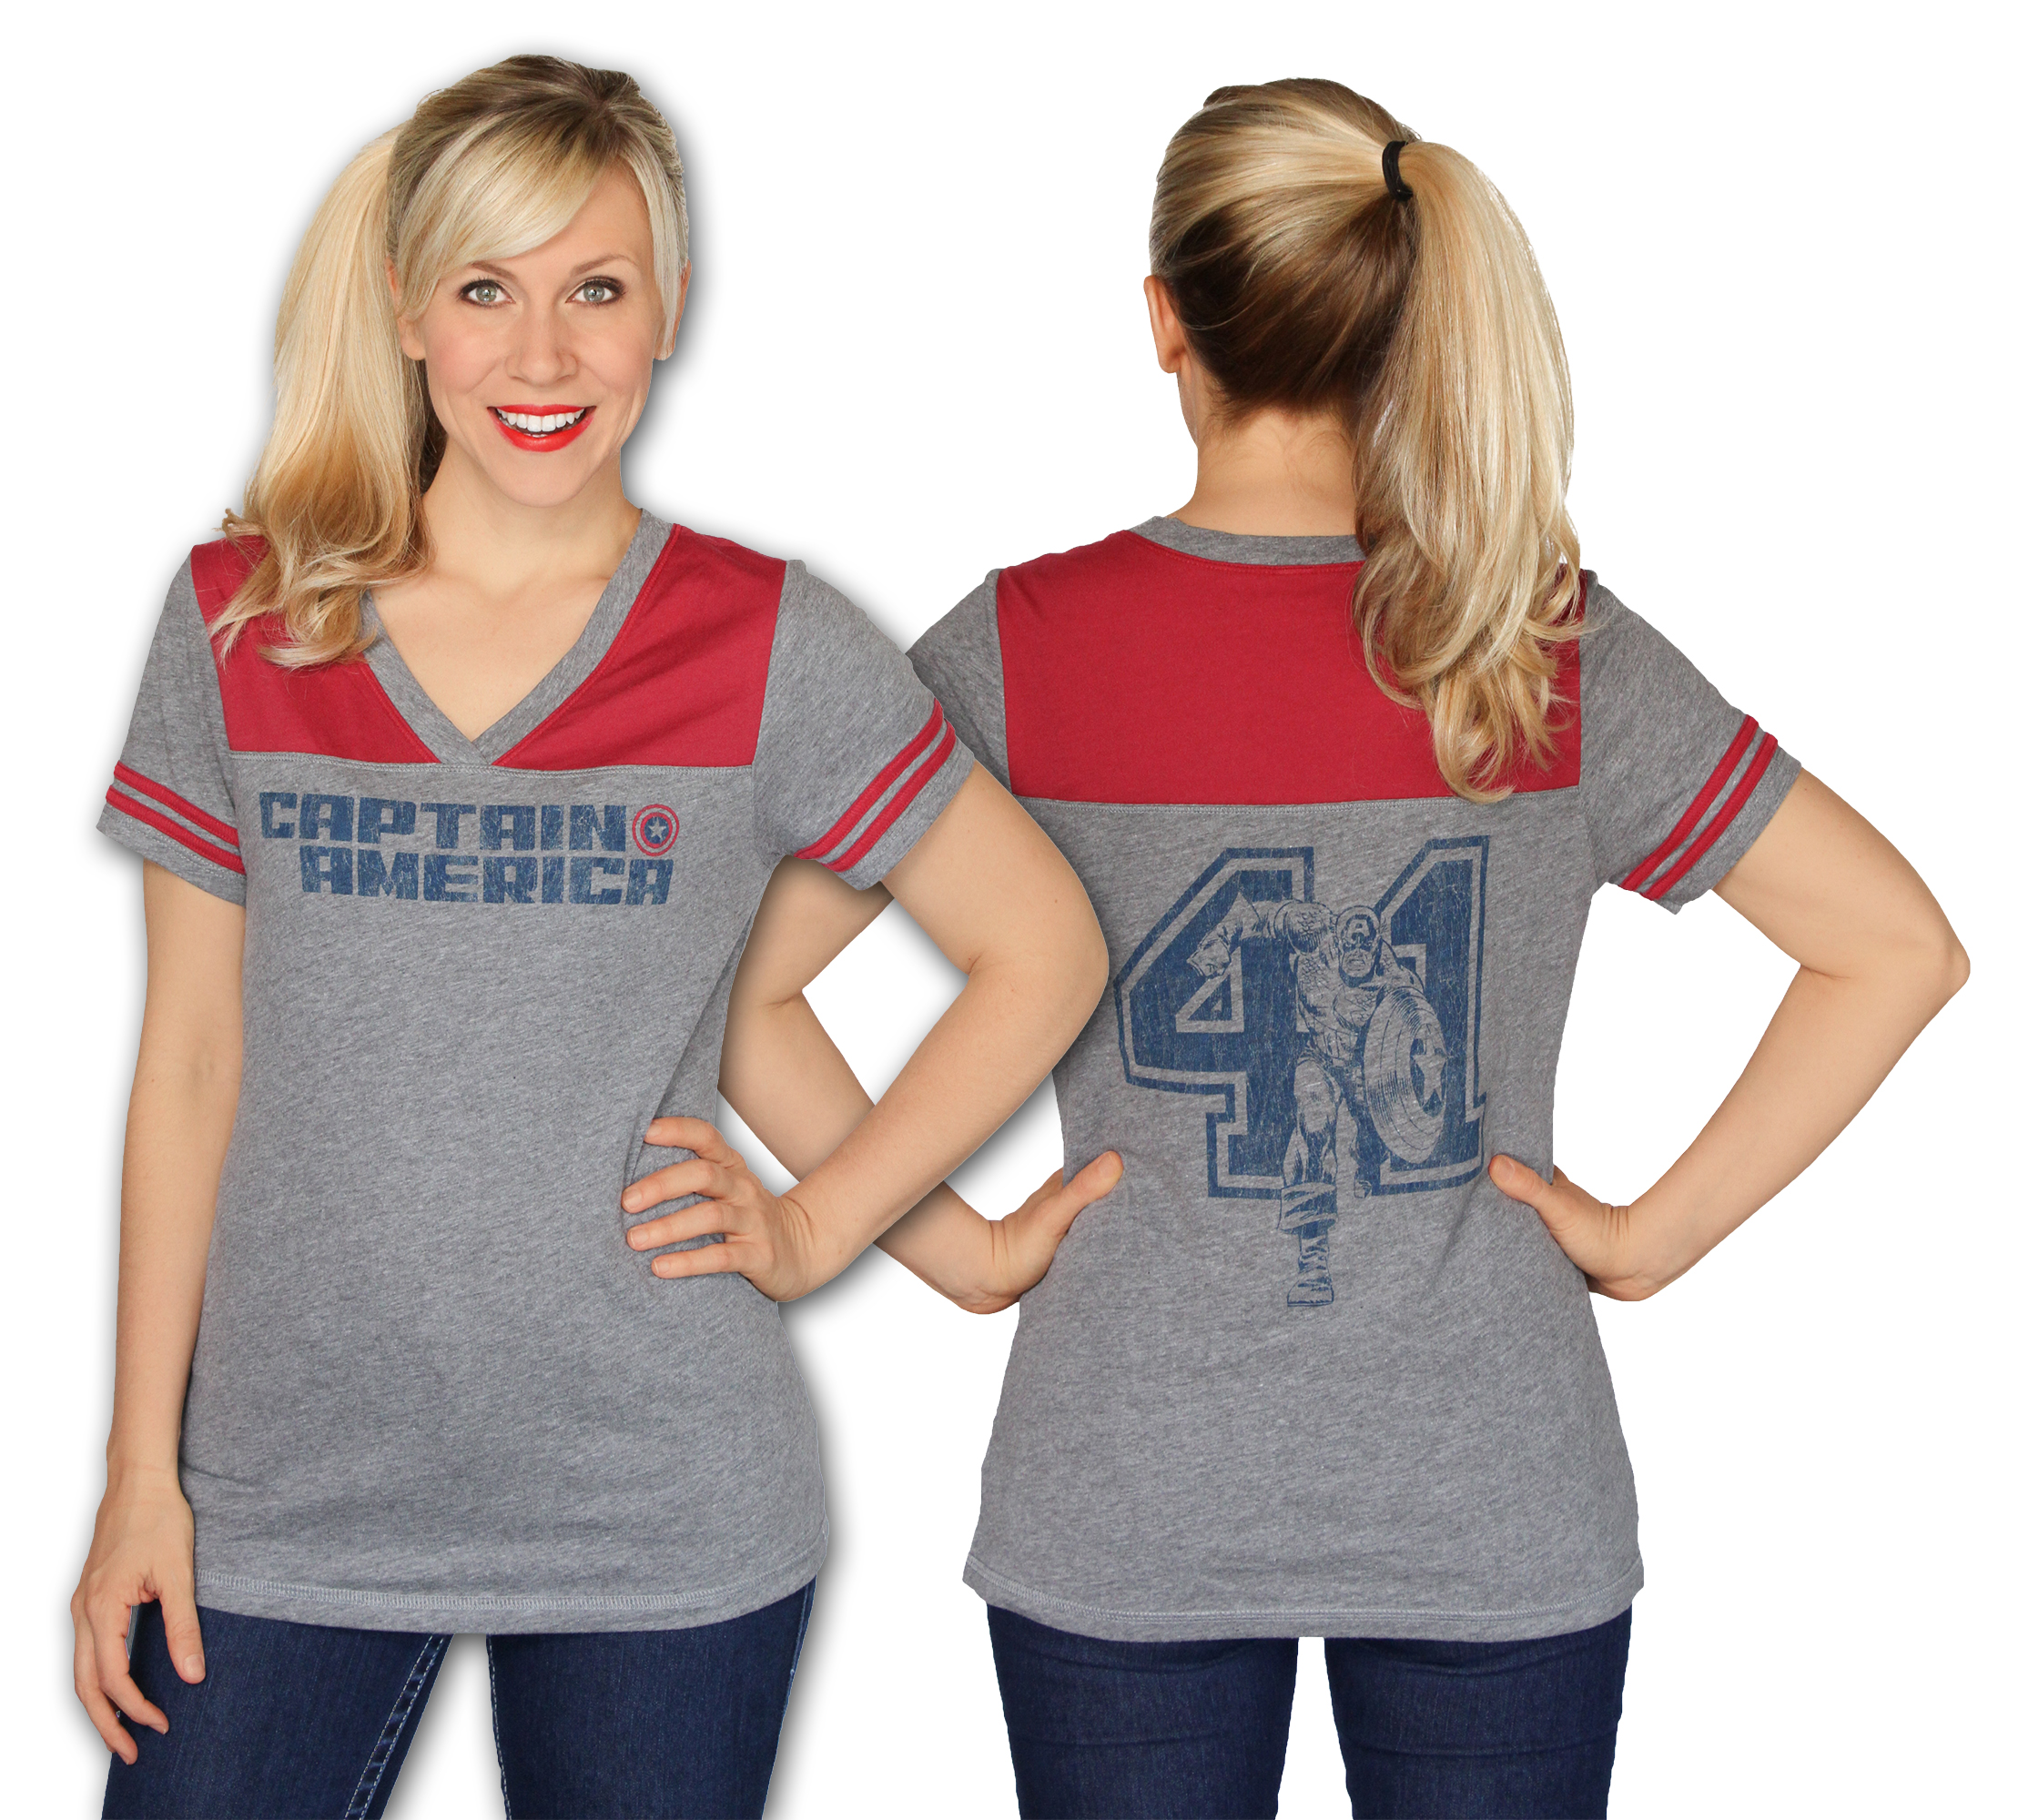 A classic logo shirt for a classic hero! This Her Universe athletic jersey tee is soft and flattering and is the perfect casual shirt to express your love for Captain America!